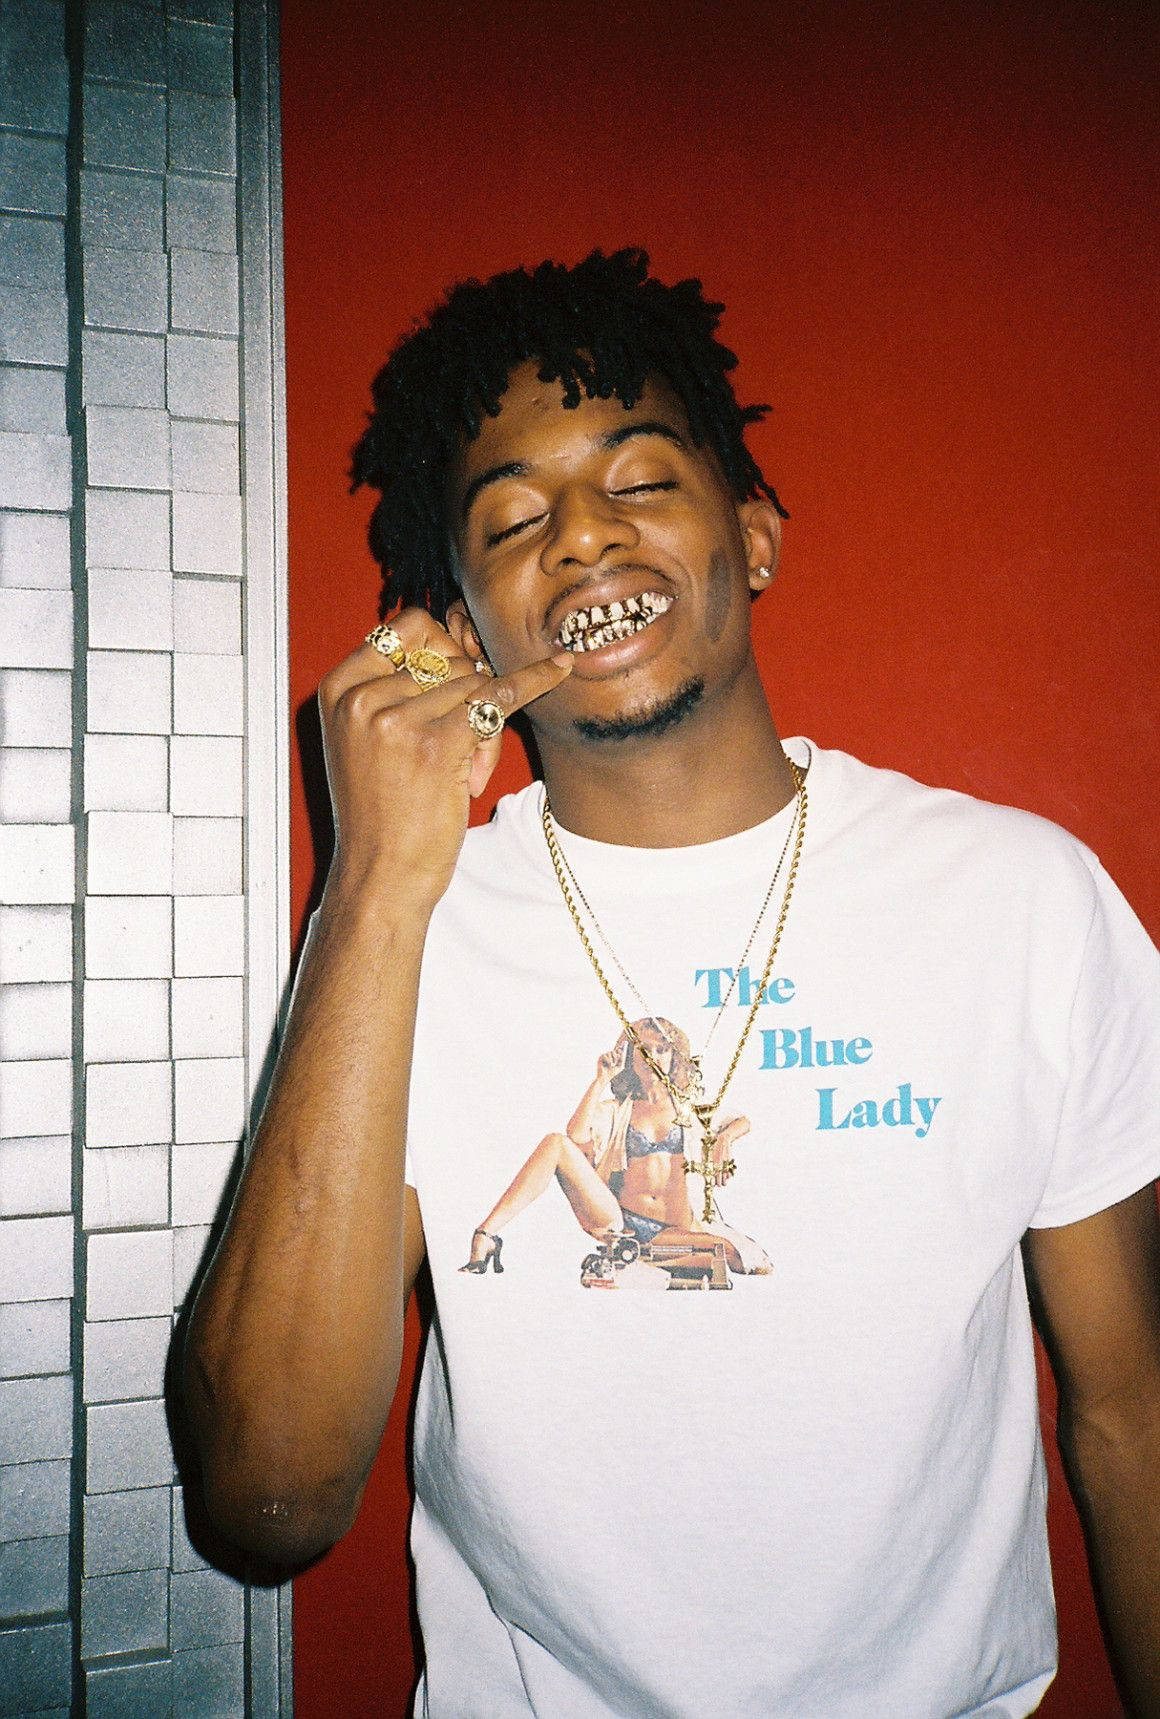 Playboi Carti gives a wide smile for his fans Wallpaper